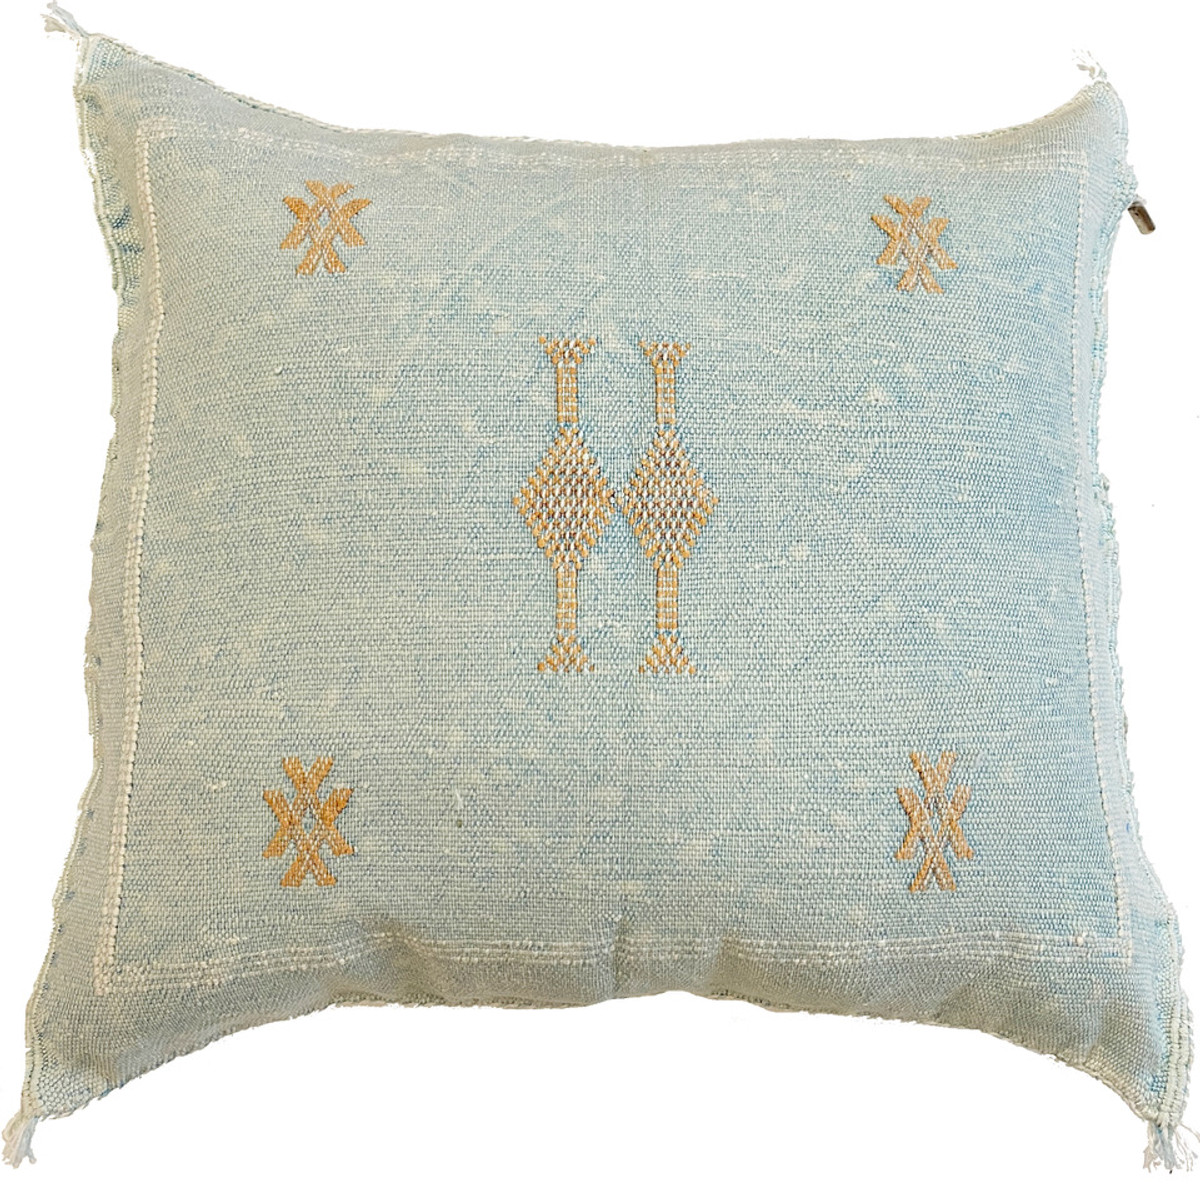 Handwoven Inlay Design Rayon Pillow Light Blue 2 Morocco Colors: variegated and ‘washed’ light robins egg blue with accent design in white and feint copper. 